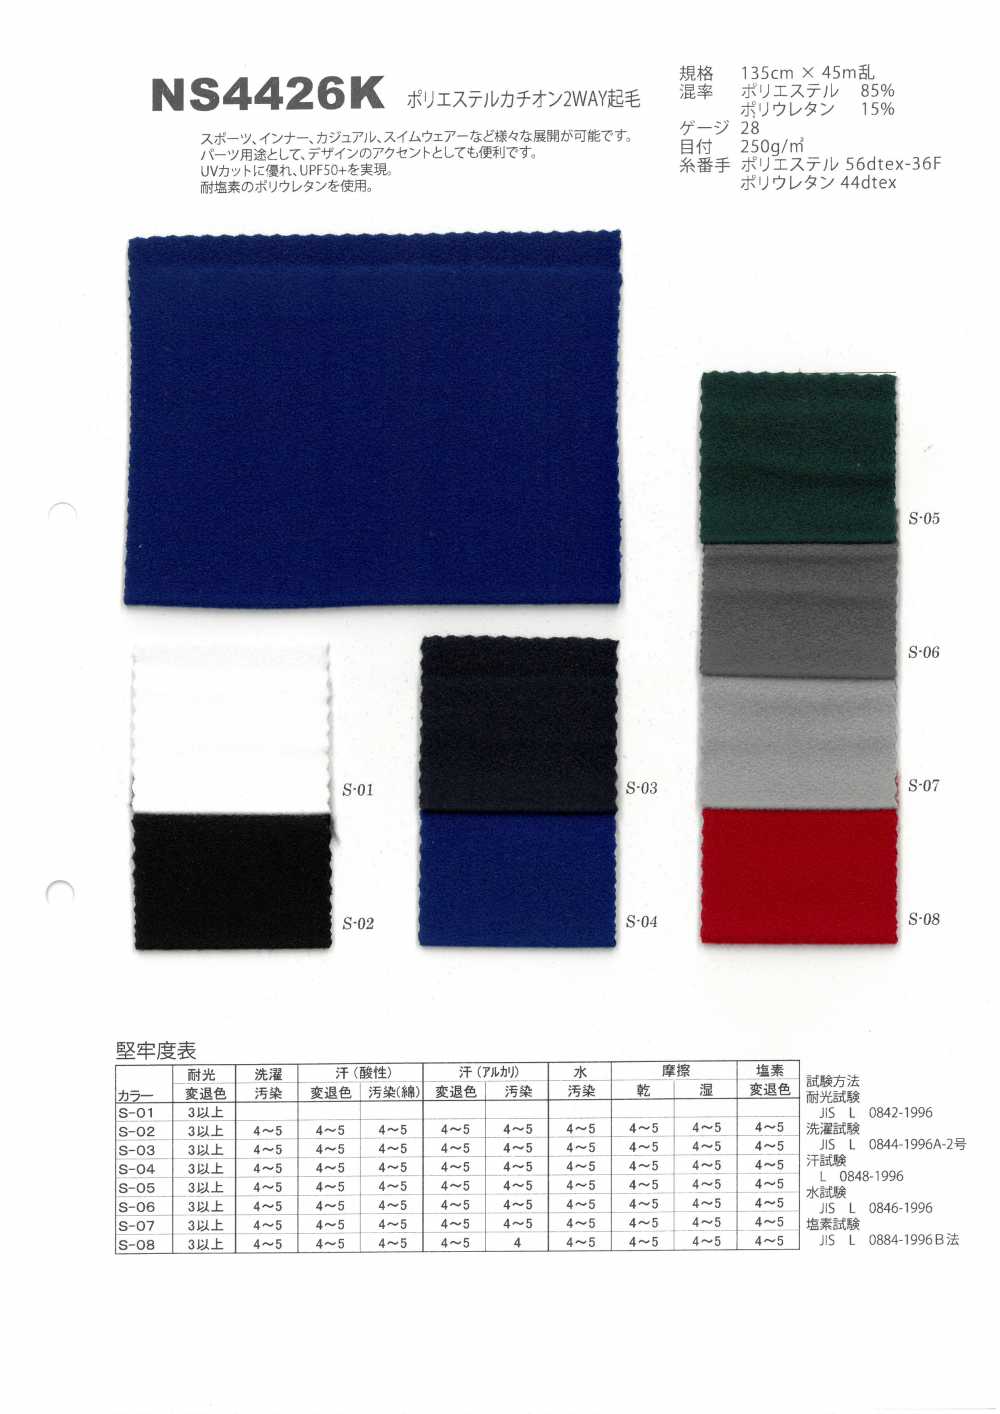 NS4426K Polyester Cationic 2-way Fuzzy[Textile / Fabric] Japan Stretch